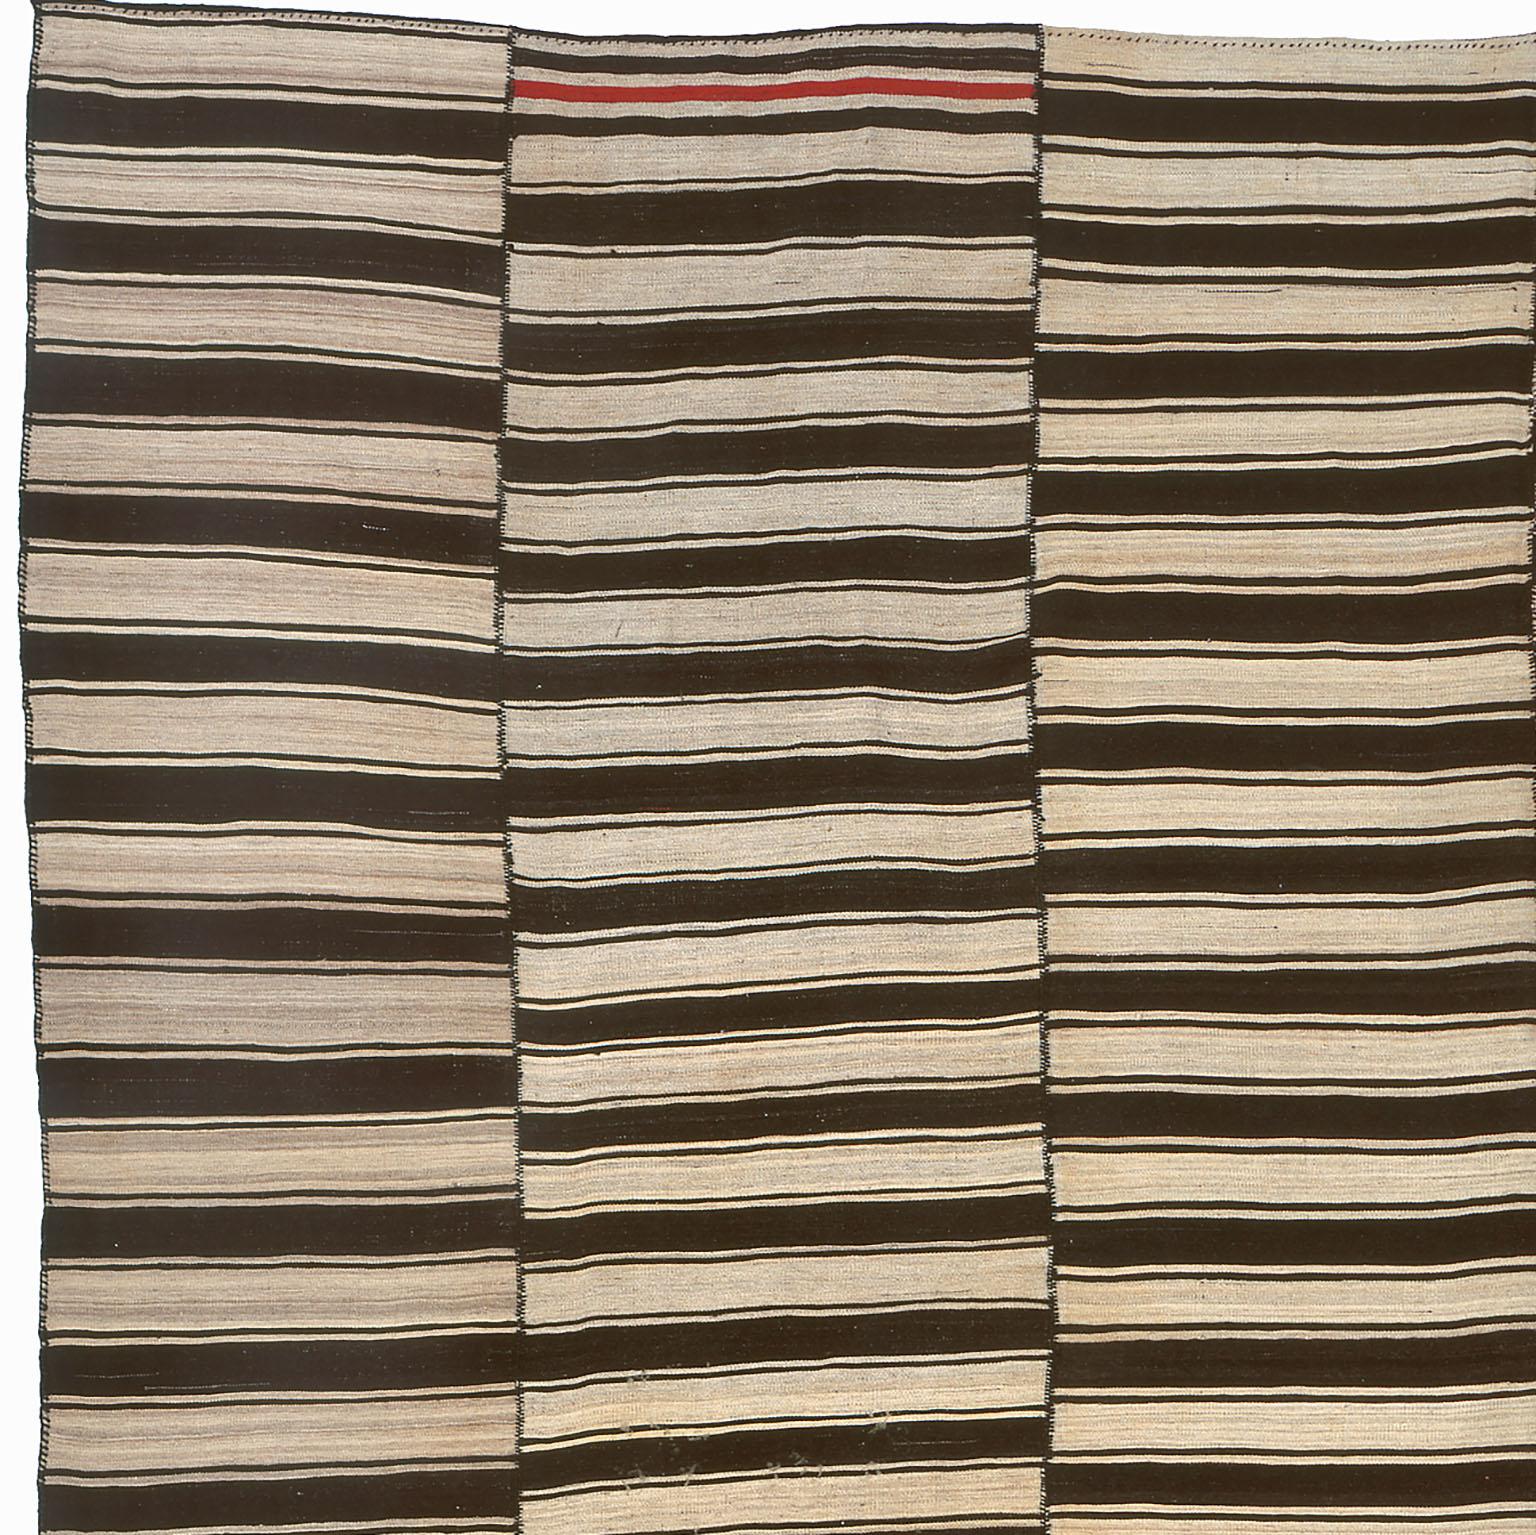 Vintage Kilim Composition composed of Persian panels circa 1940
Handmade black and white striped rug with red detail.